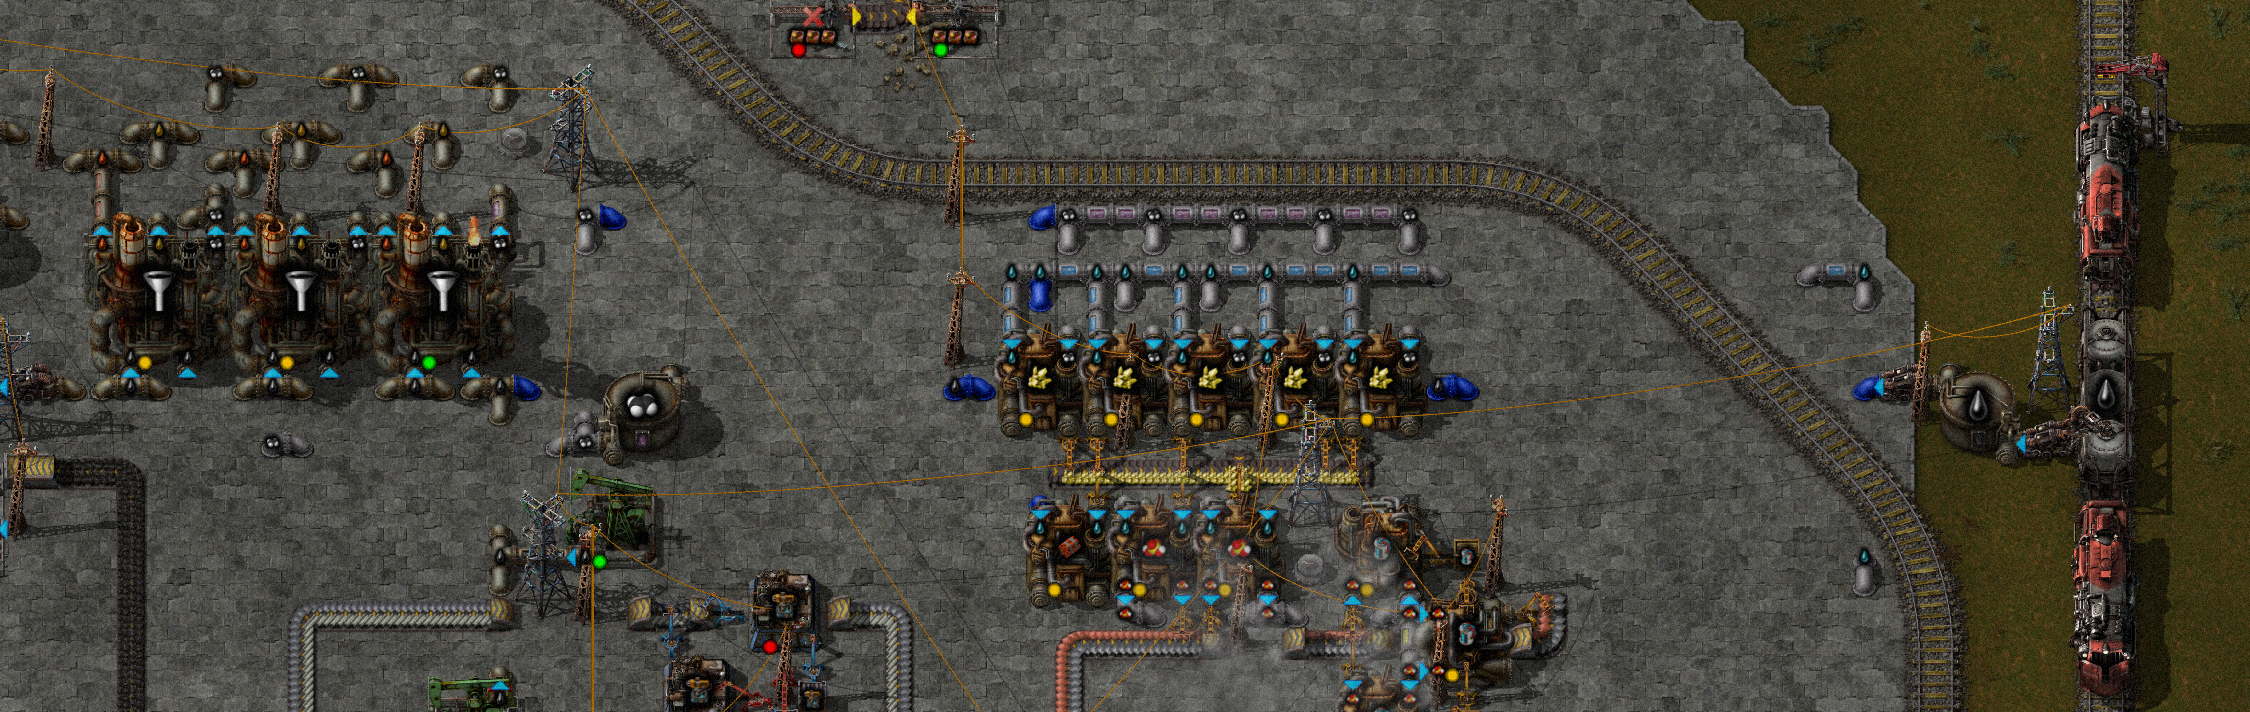 simple_early_game_refinery_dropoff.png